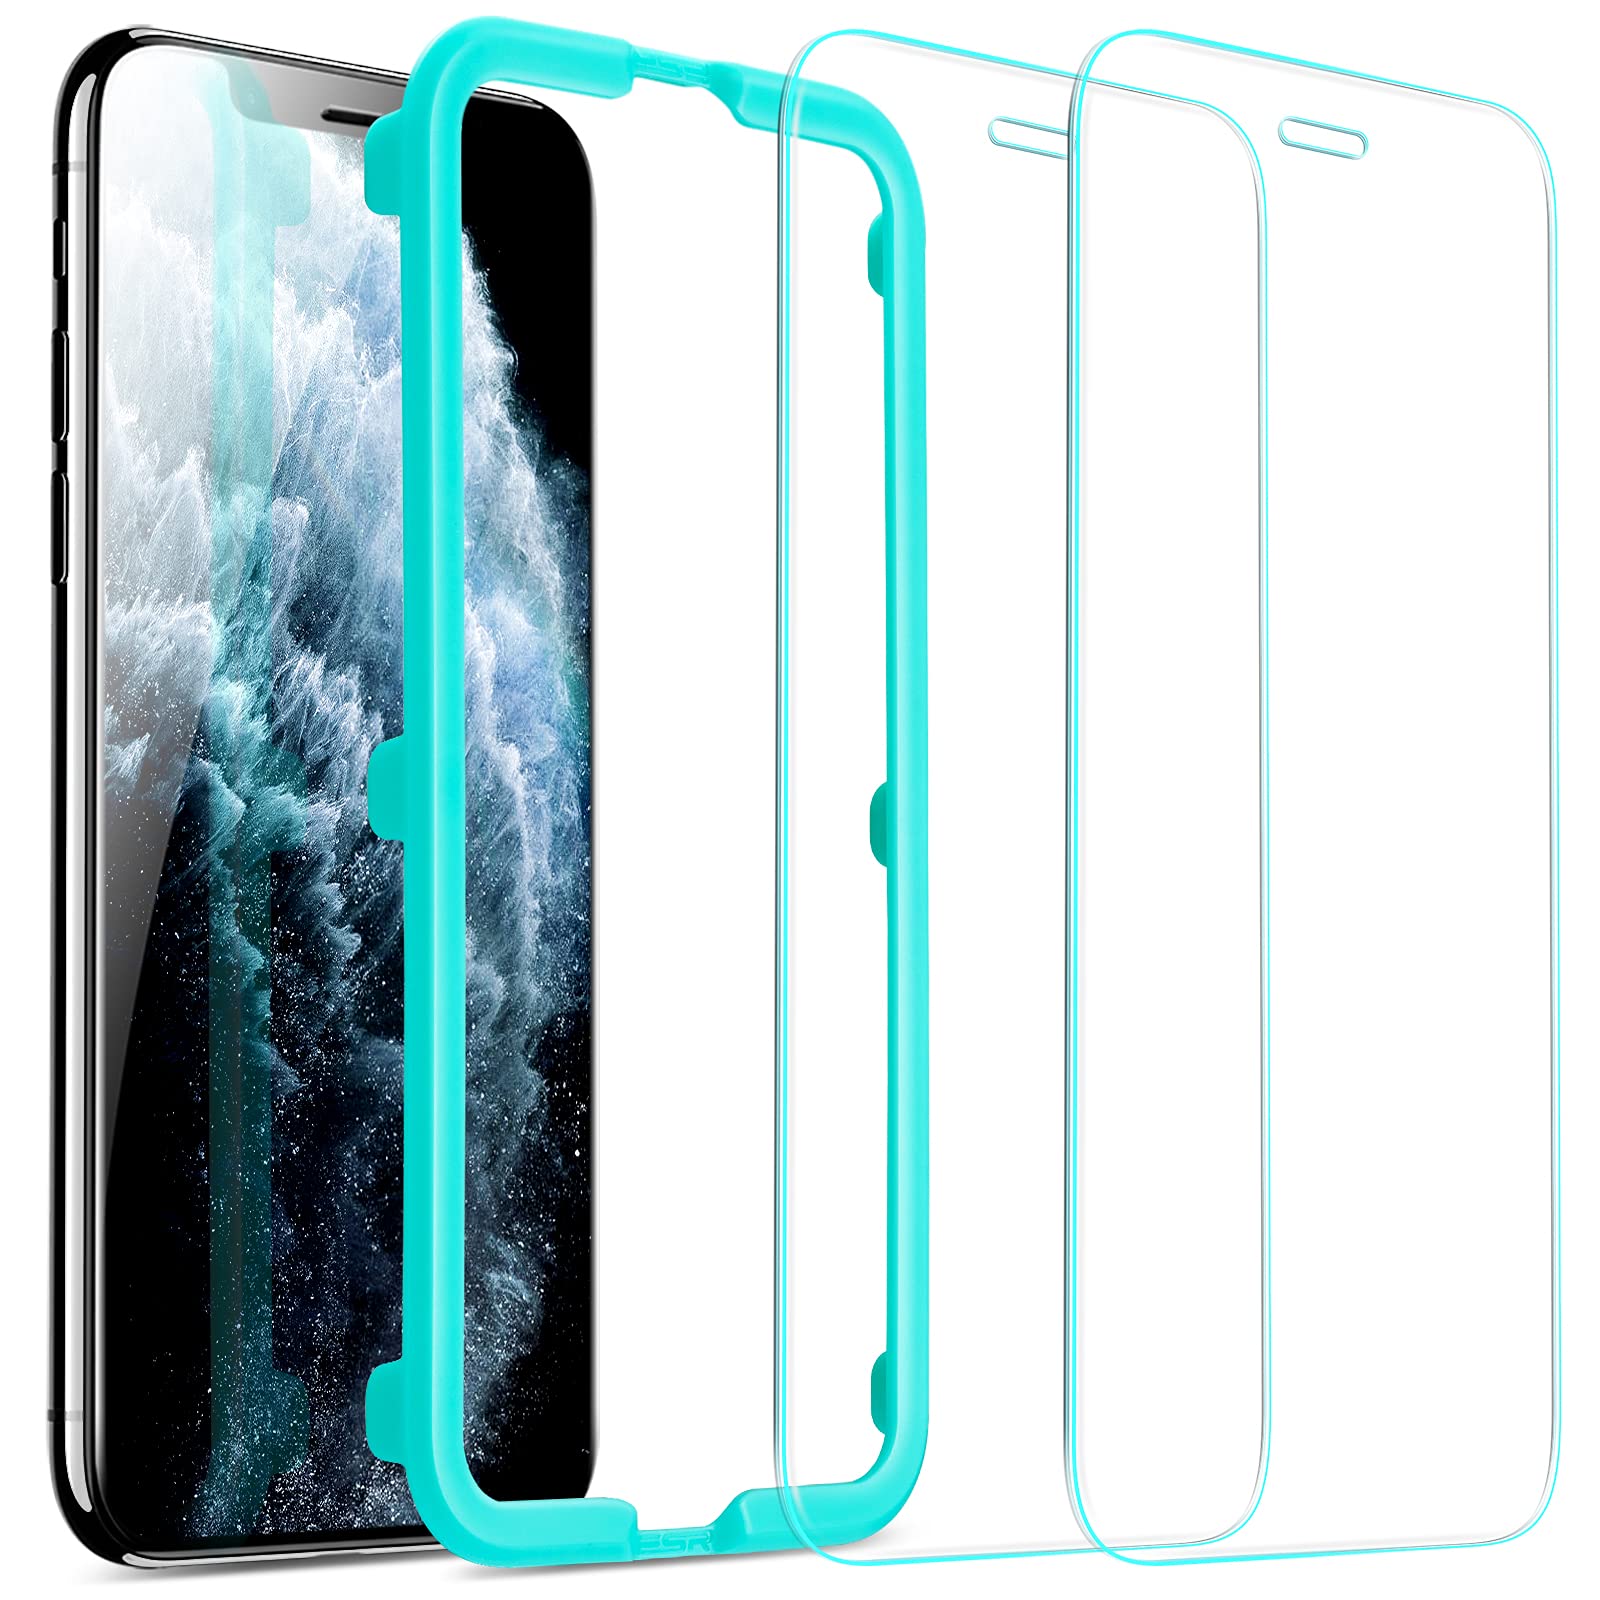 Book Cover ESR Tempered-Glass Screen Protector Compatible with iPhone 11 Pro Max/iPhone XS Max, Easy Installation Frame, Case Friendly, Premium Tempered-Glass Screen Protector for iPhone 6.5 Inch (2019), 2 Pack